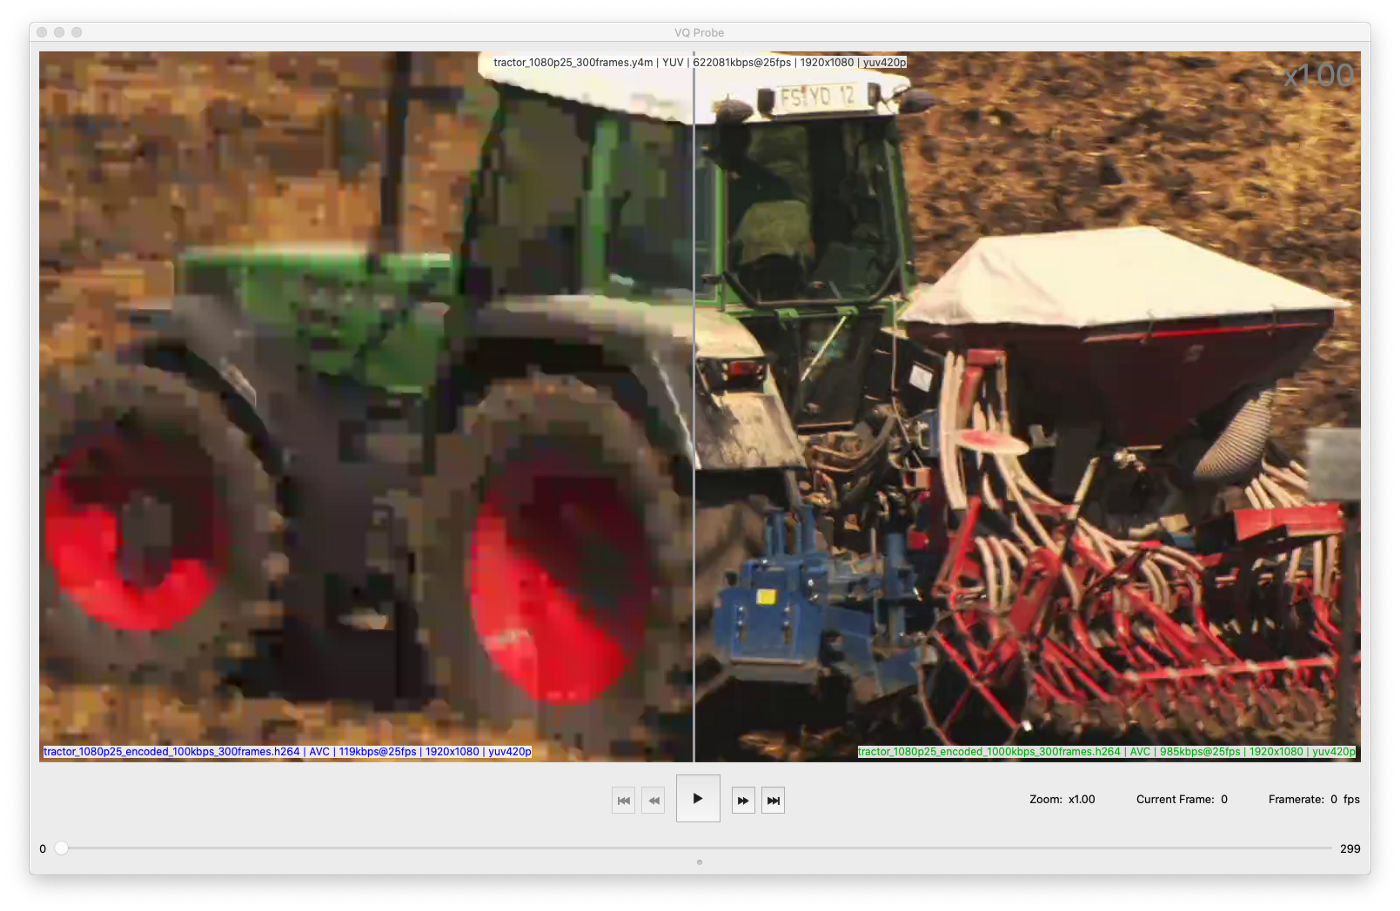 tractor_1080p25_encoded_100kbps_300frames.h264 vs. tractor_1080p25_encoded_1000kbps_300frames.h264, frame #46